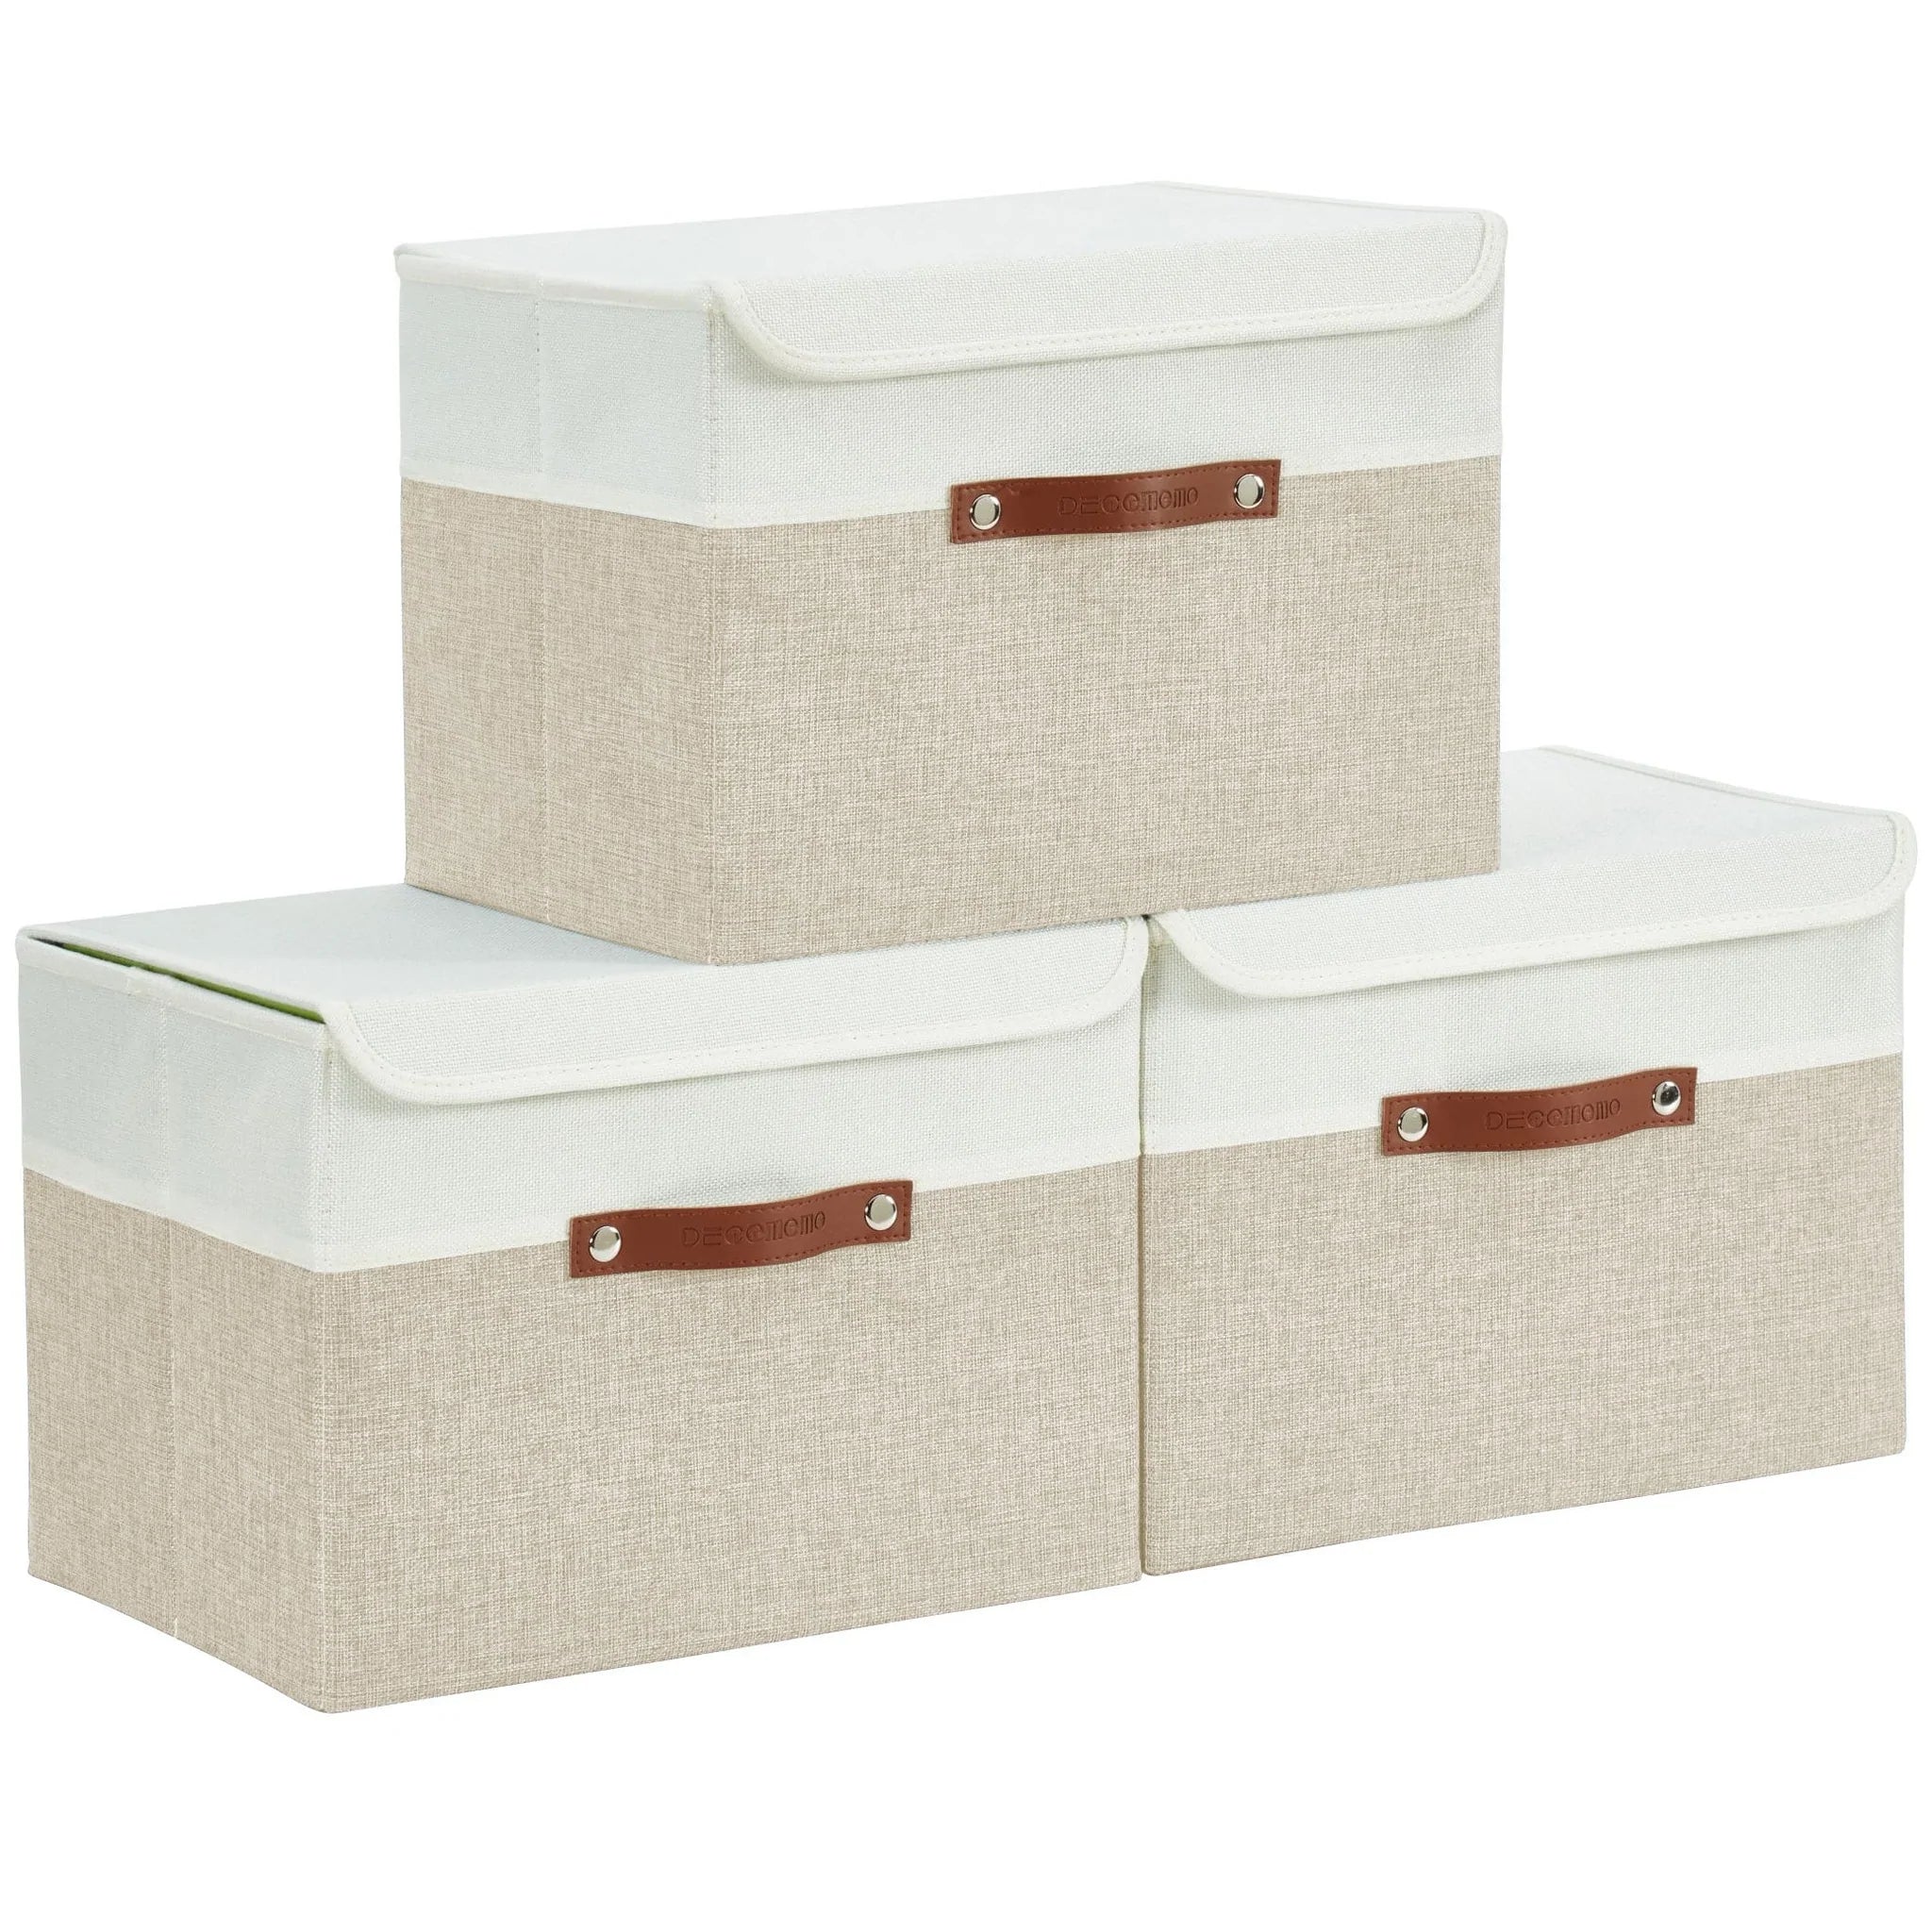 Collapsible Sturdy Storage Bin With Lid - 3 pack